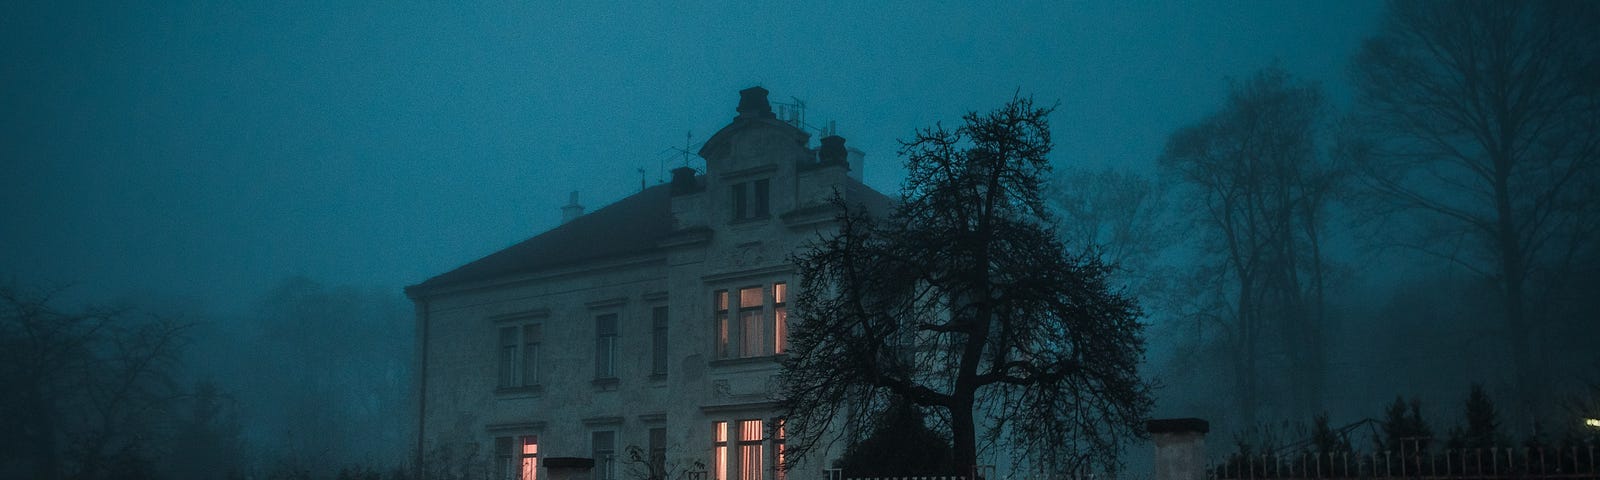 Picture taking during a foggy night. A picture of the outside of a big house with lights on in a few rooms and a big tree next to it. Eerie and scary vibe.